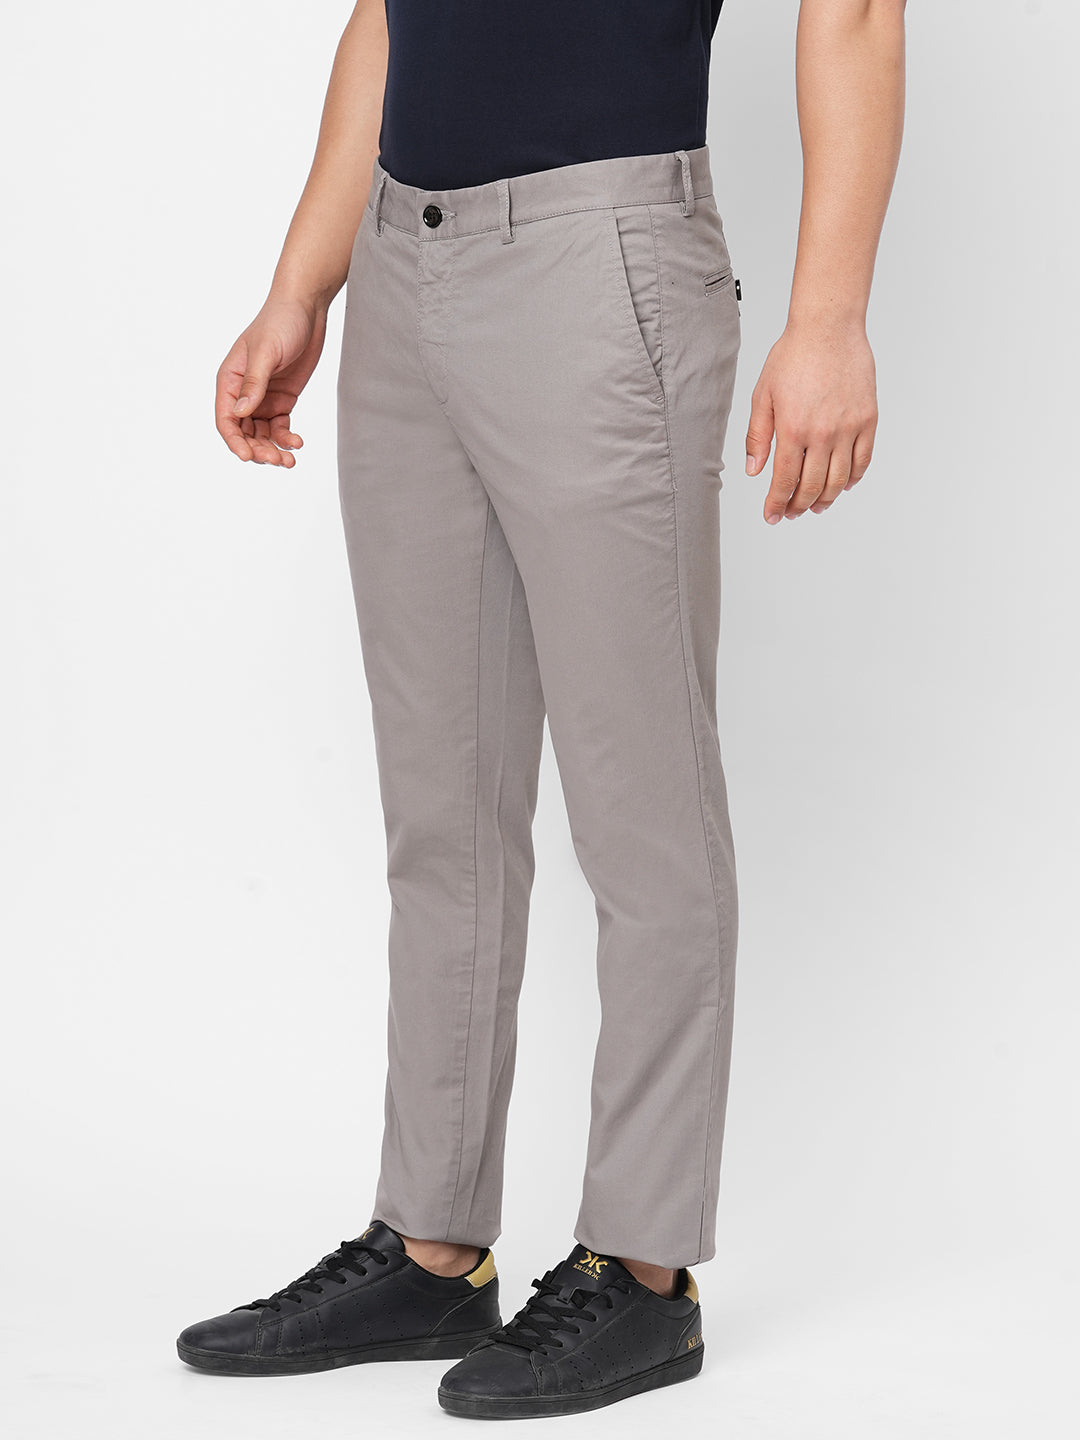 Buy TOMMY HILFIGER Silver Grey Mens Grey Bleecker Slim Fit Cotton Flex  Satin Casual Chinos  Shoppers Stop